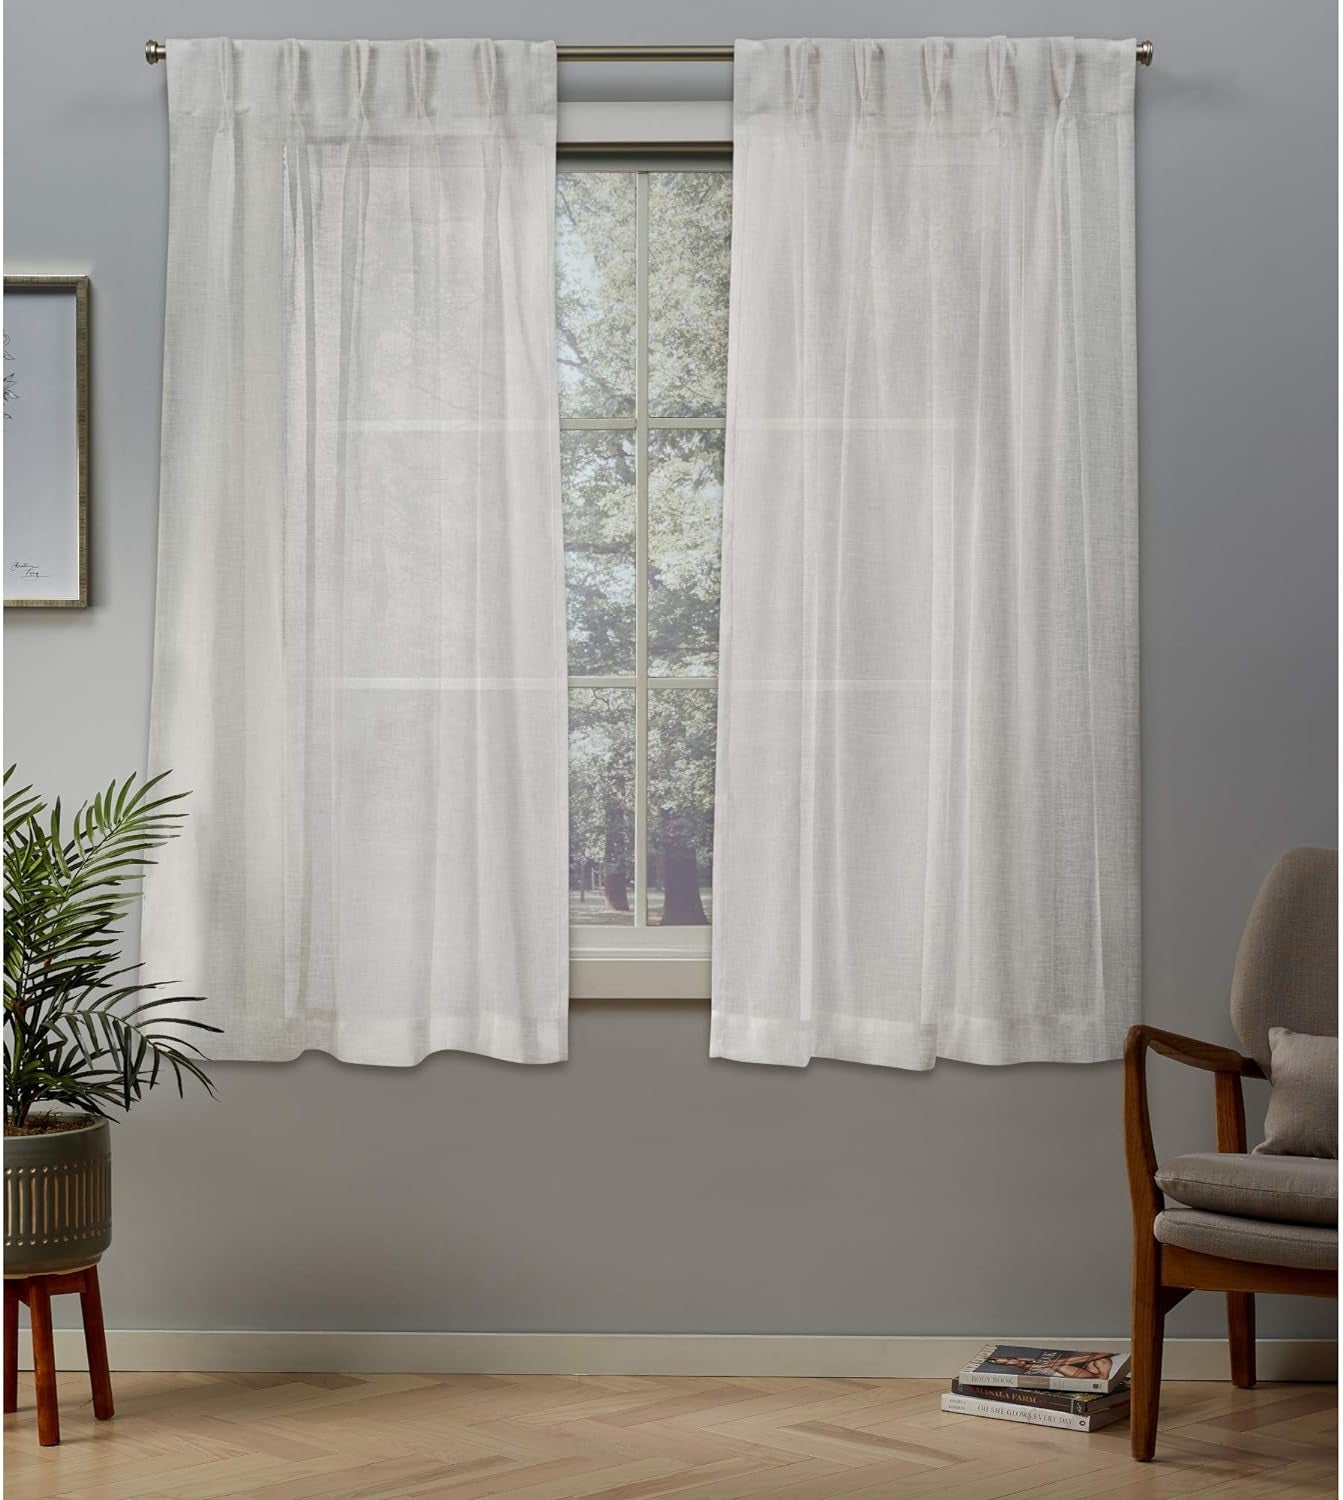 Exclusive Home Belgian Pp Sheer Textured Linen Look Jacquard Pinch Pleat Panel Pair, 30X84, Winter White, 2 Count  Exclusive Home Curtains Snowflake 30X63 